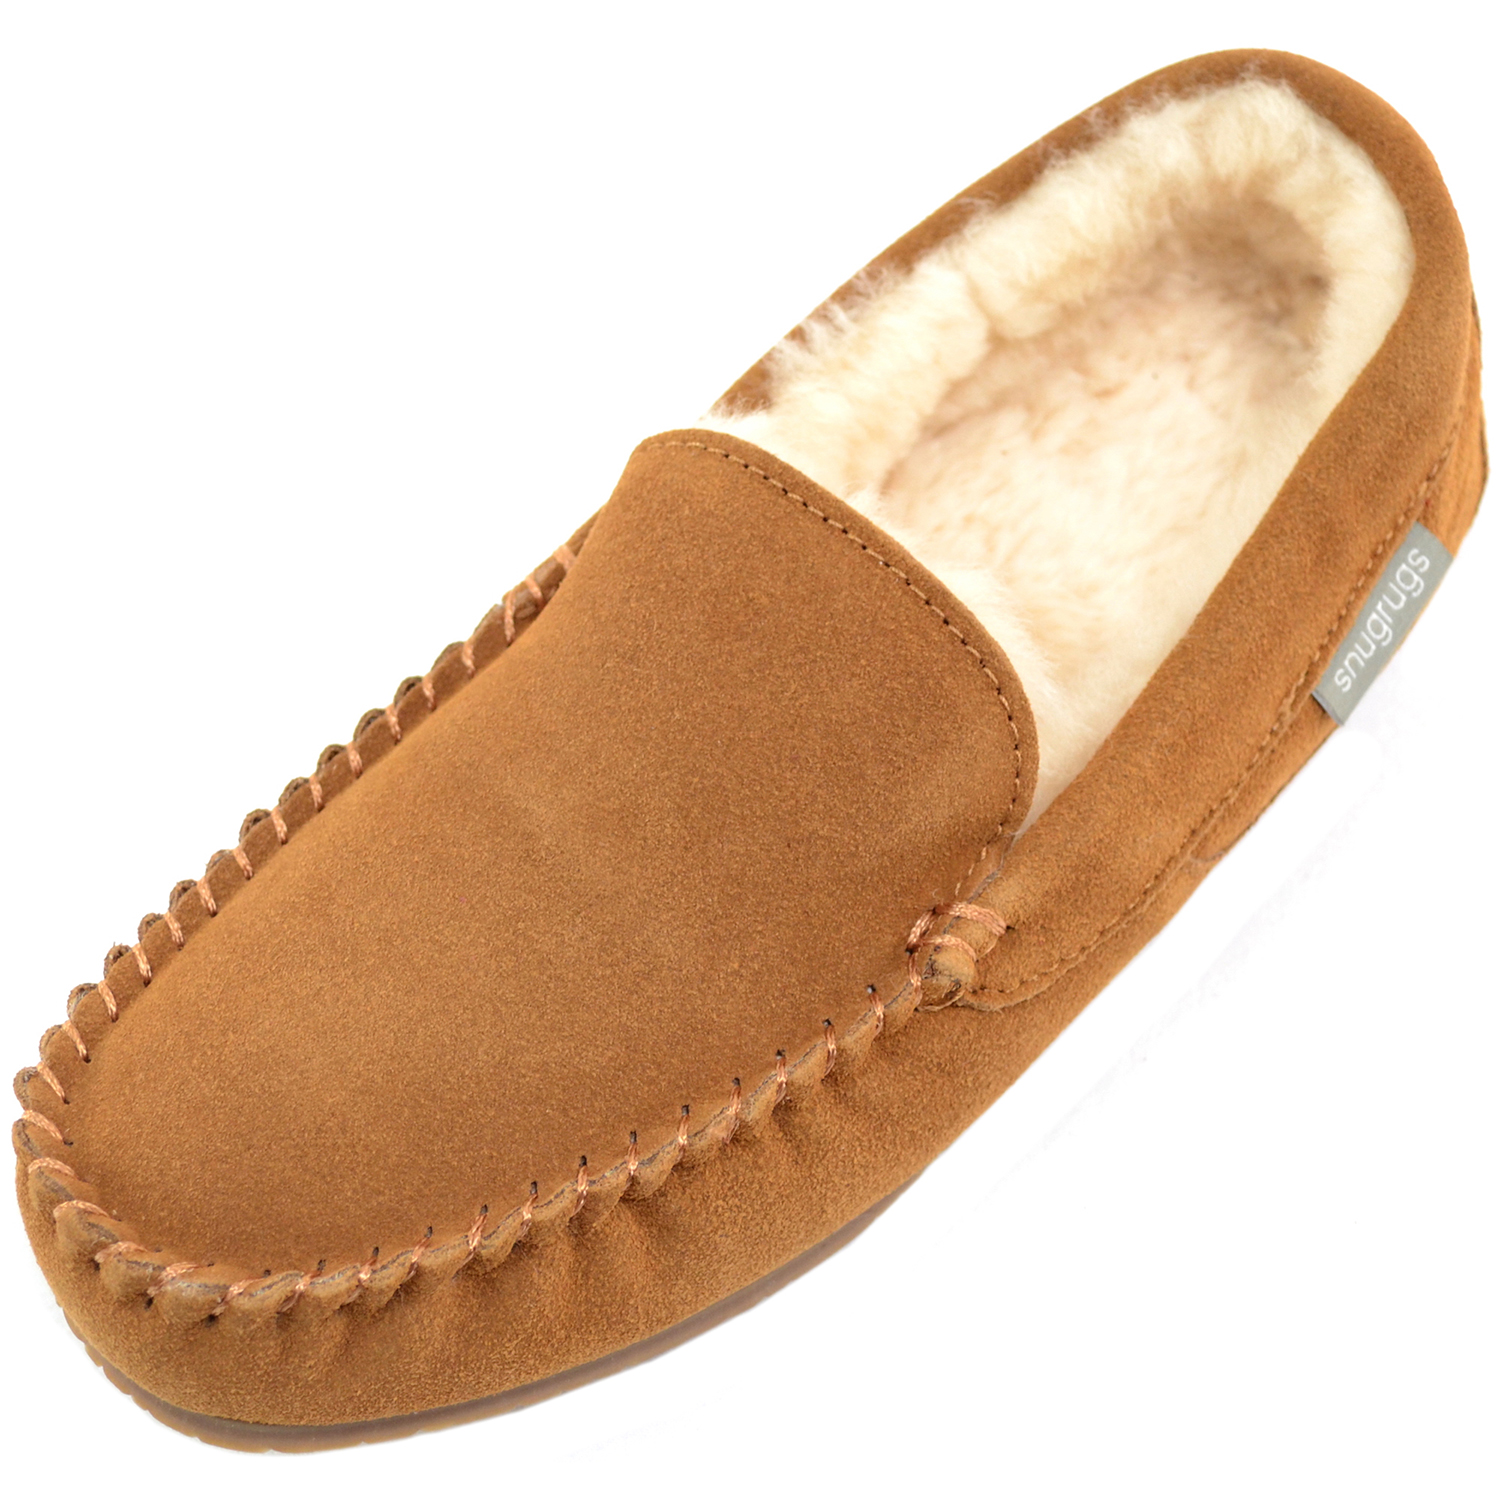 loafers slippers mens